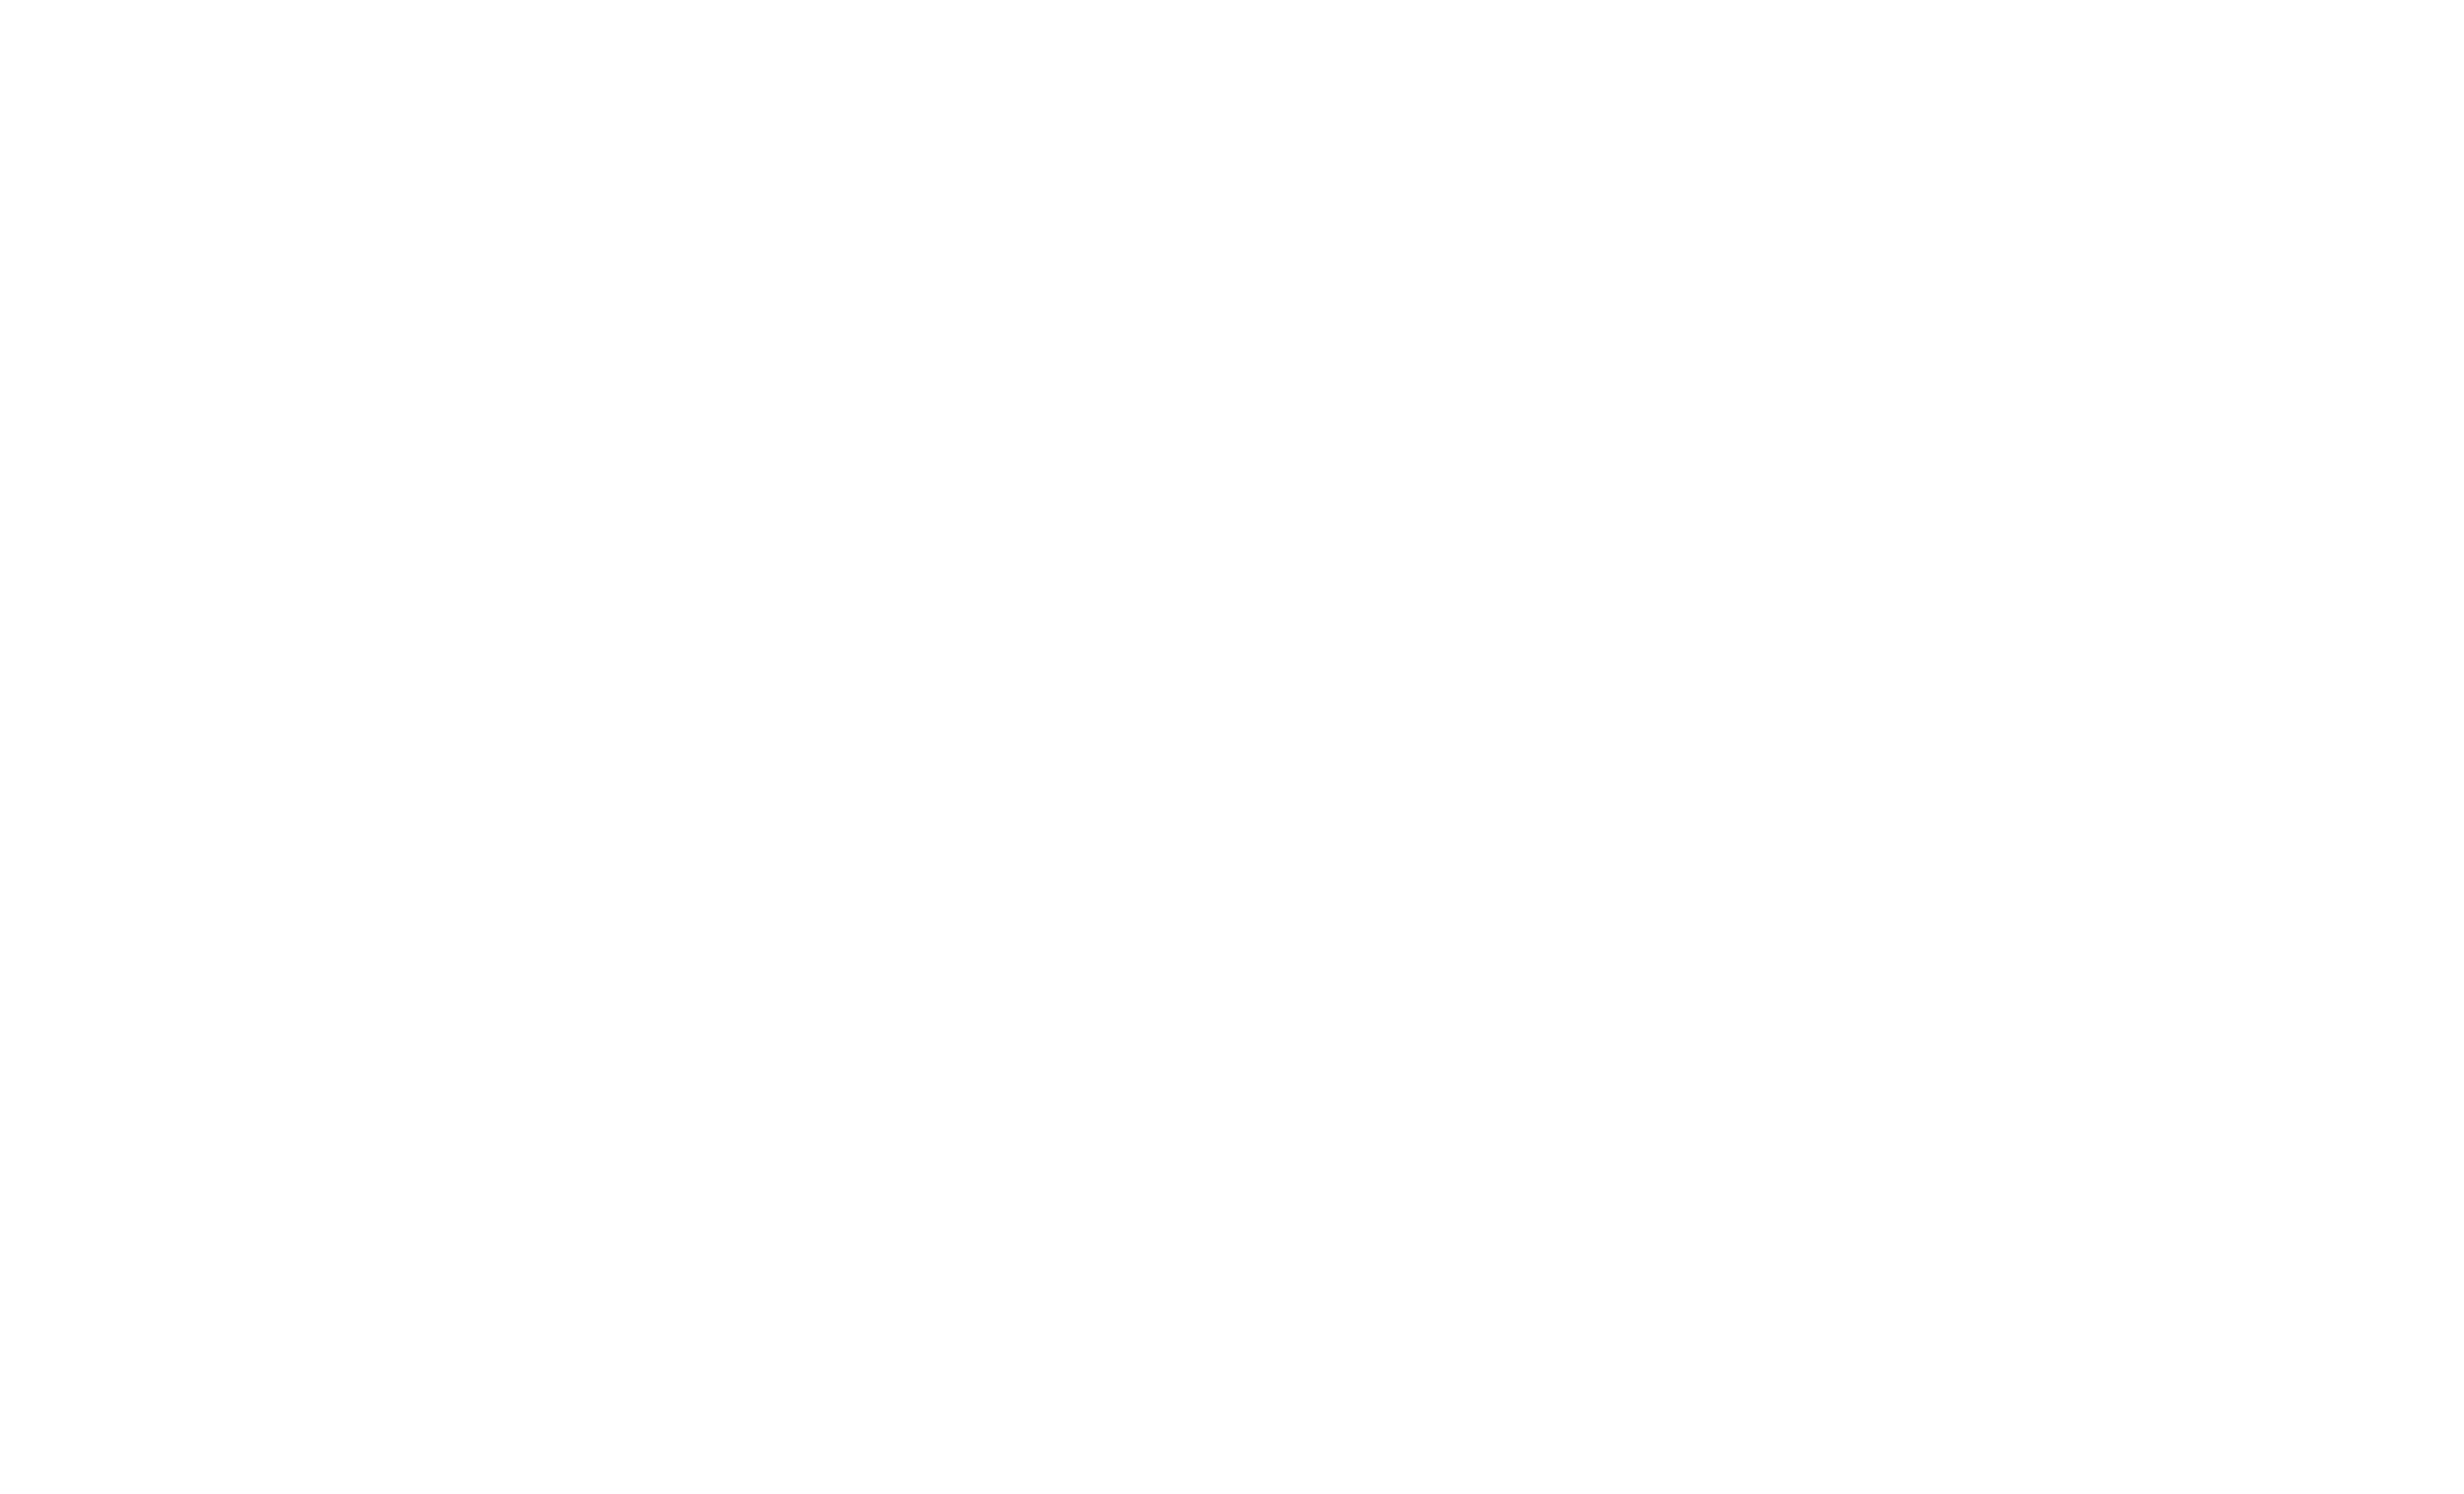 Prevail Paralegal Services